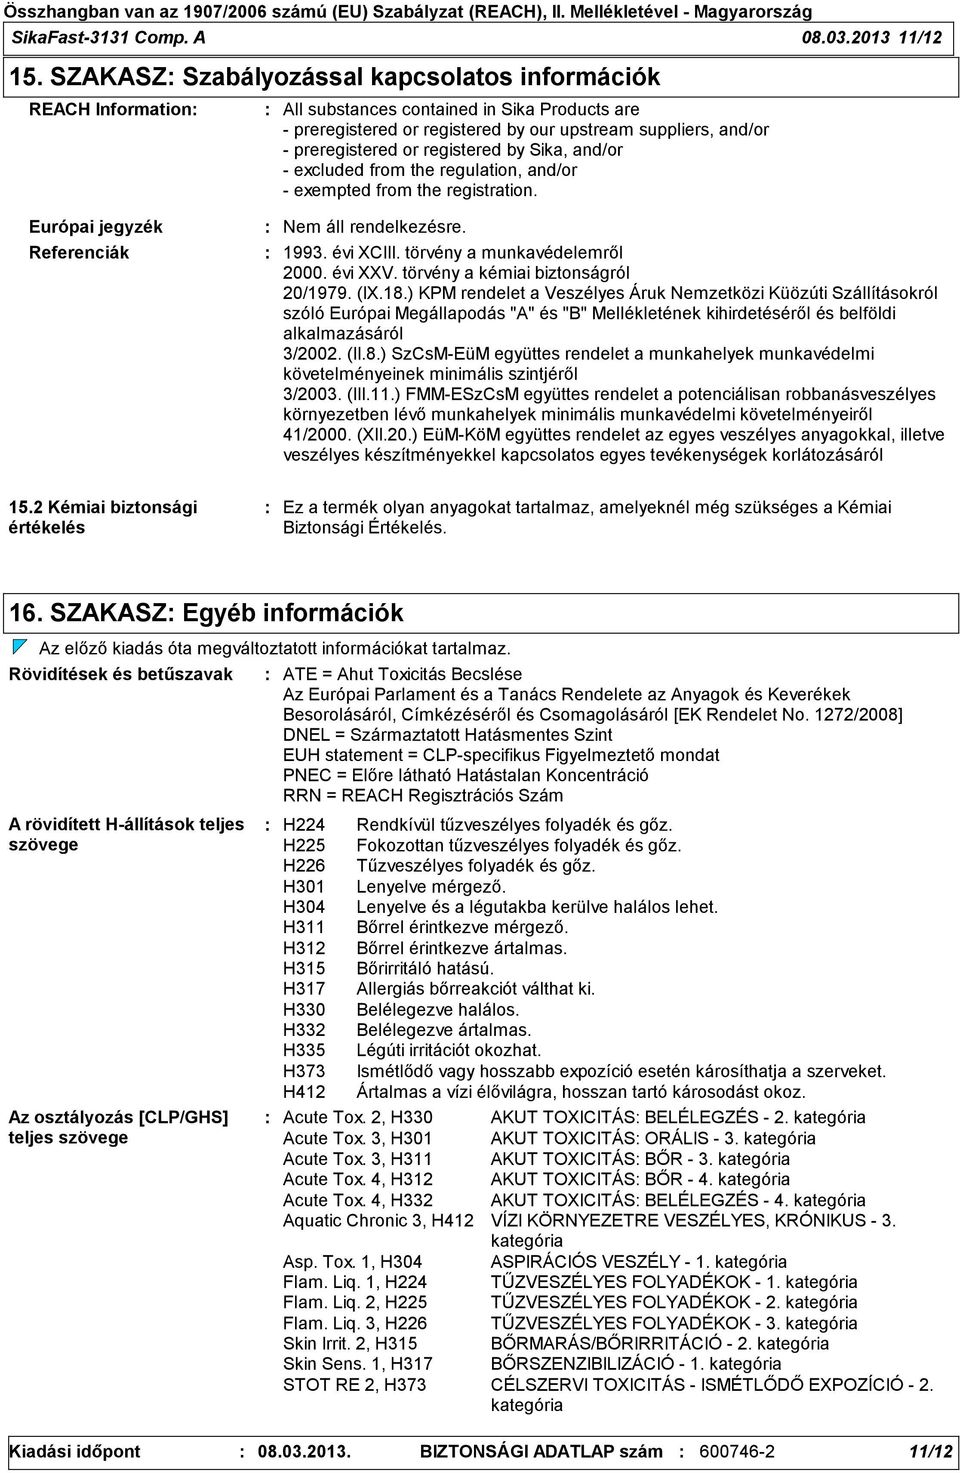 and/or - preregistered or registered by Sika, and/or - excluded from the regulation, and/or - exempted from the registration. 1993. évi XCIII. törvény a munkavédelemről 2000. évi XXV.